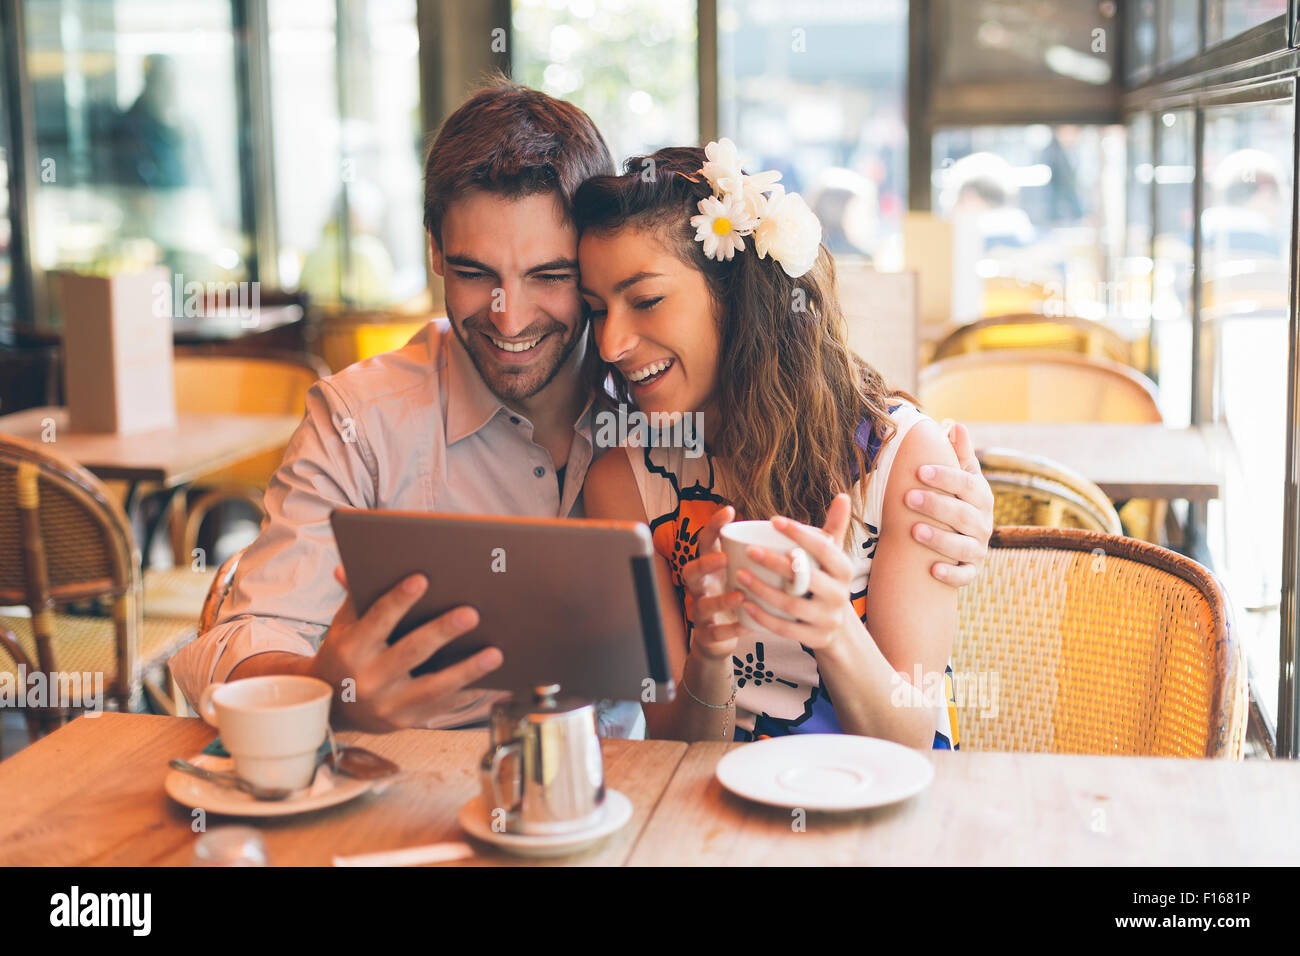 Paris, Couple dating in Cafe Stock Photo